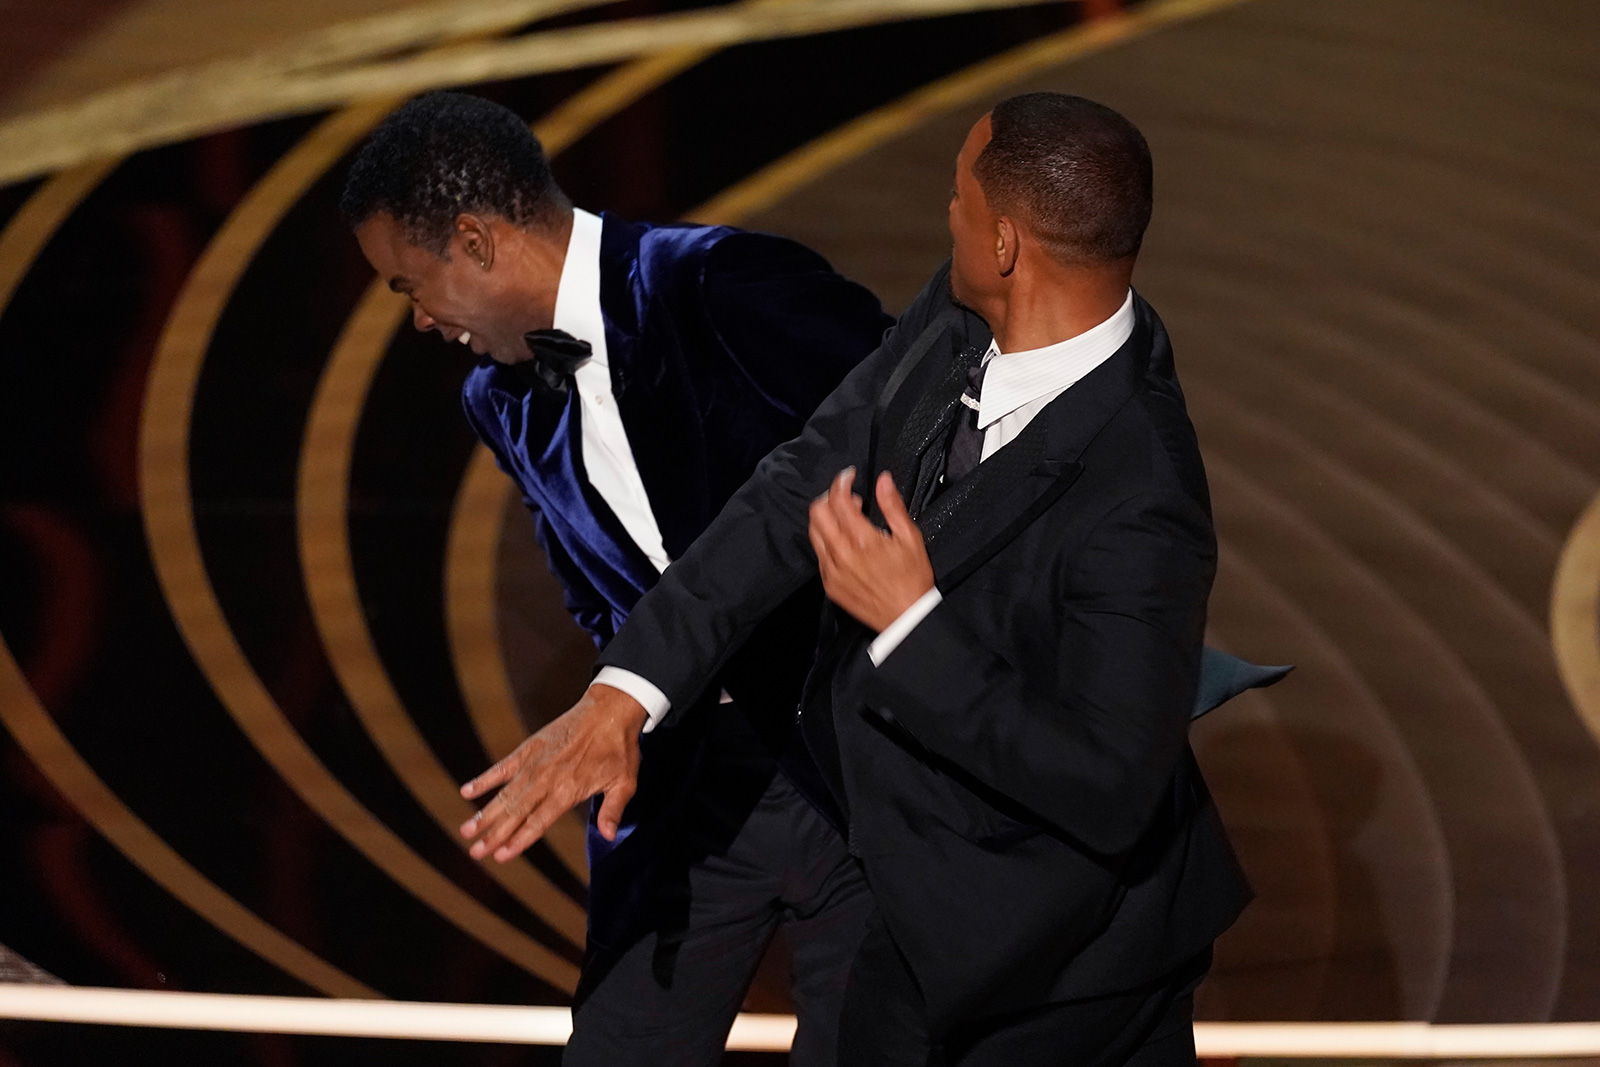 Will Smith hits Chris Rock on stage, then wins an Oscar - CNN Video